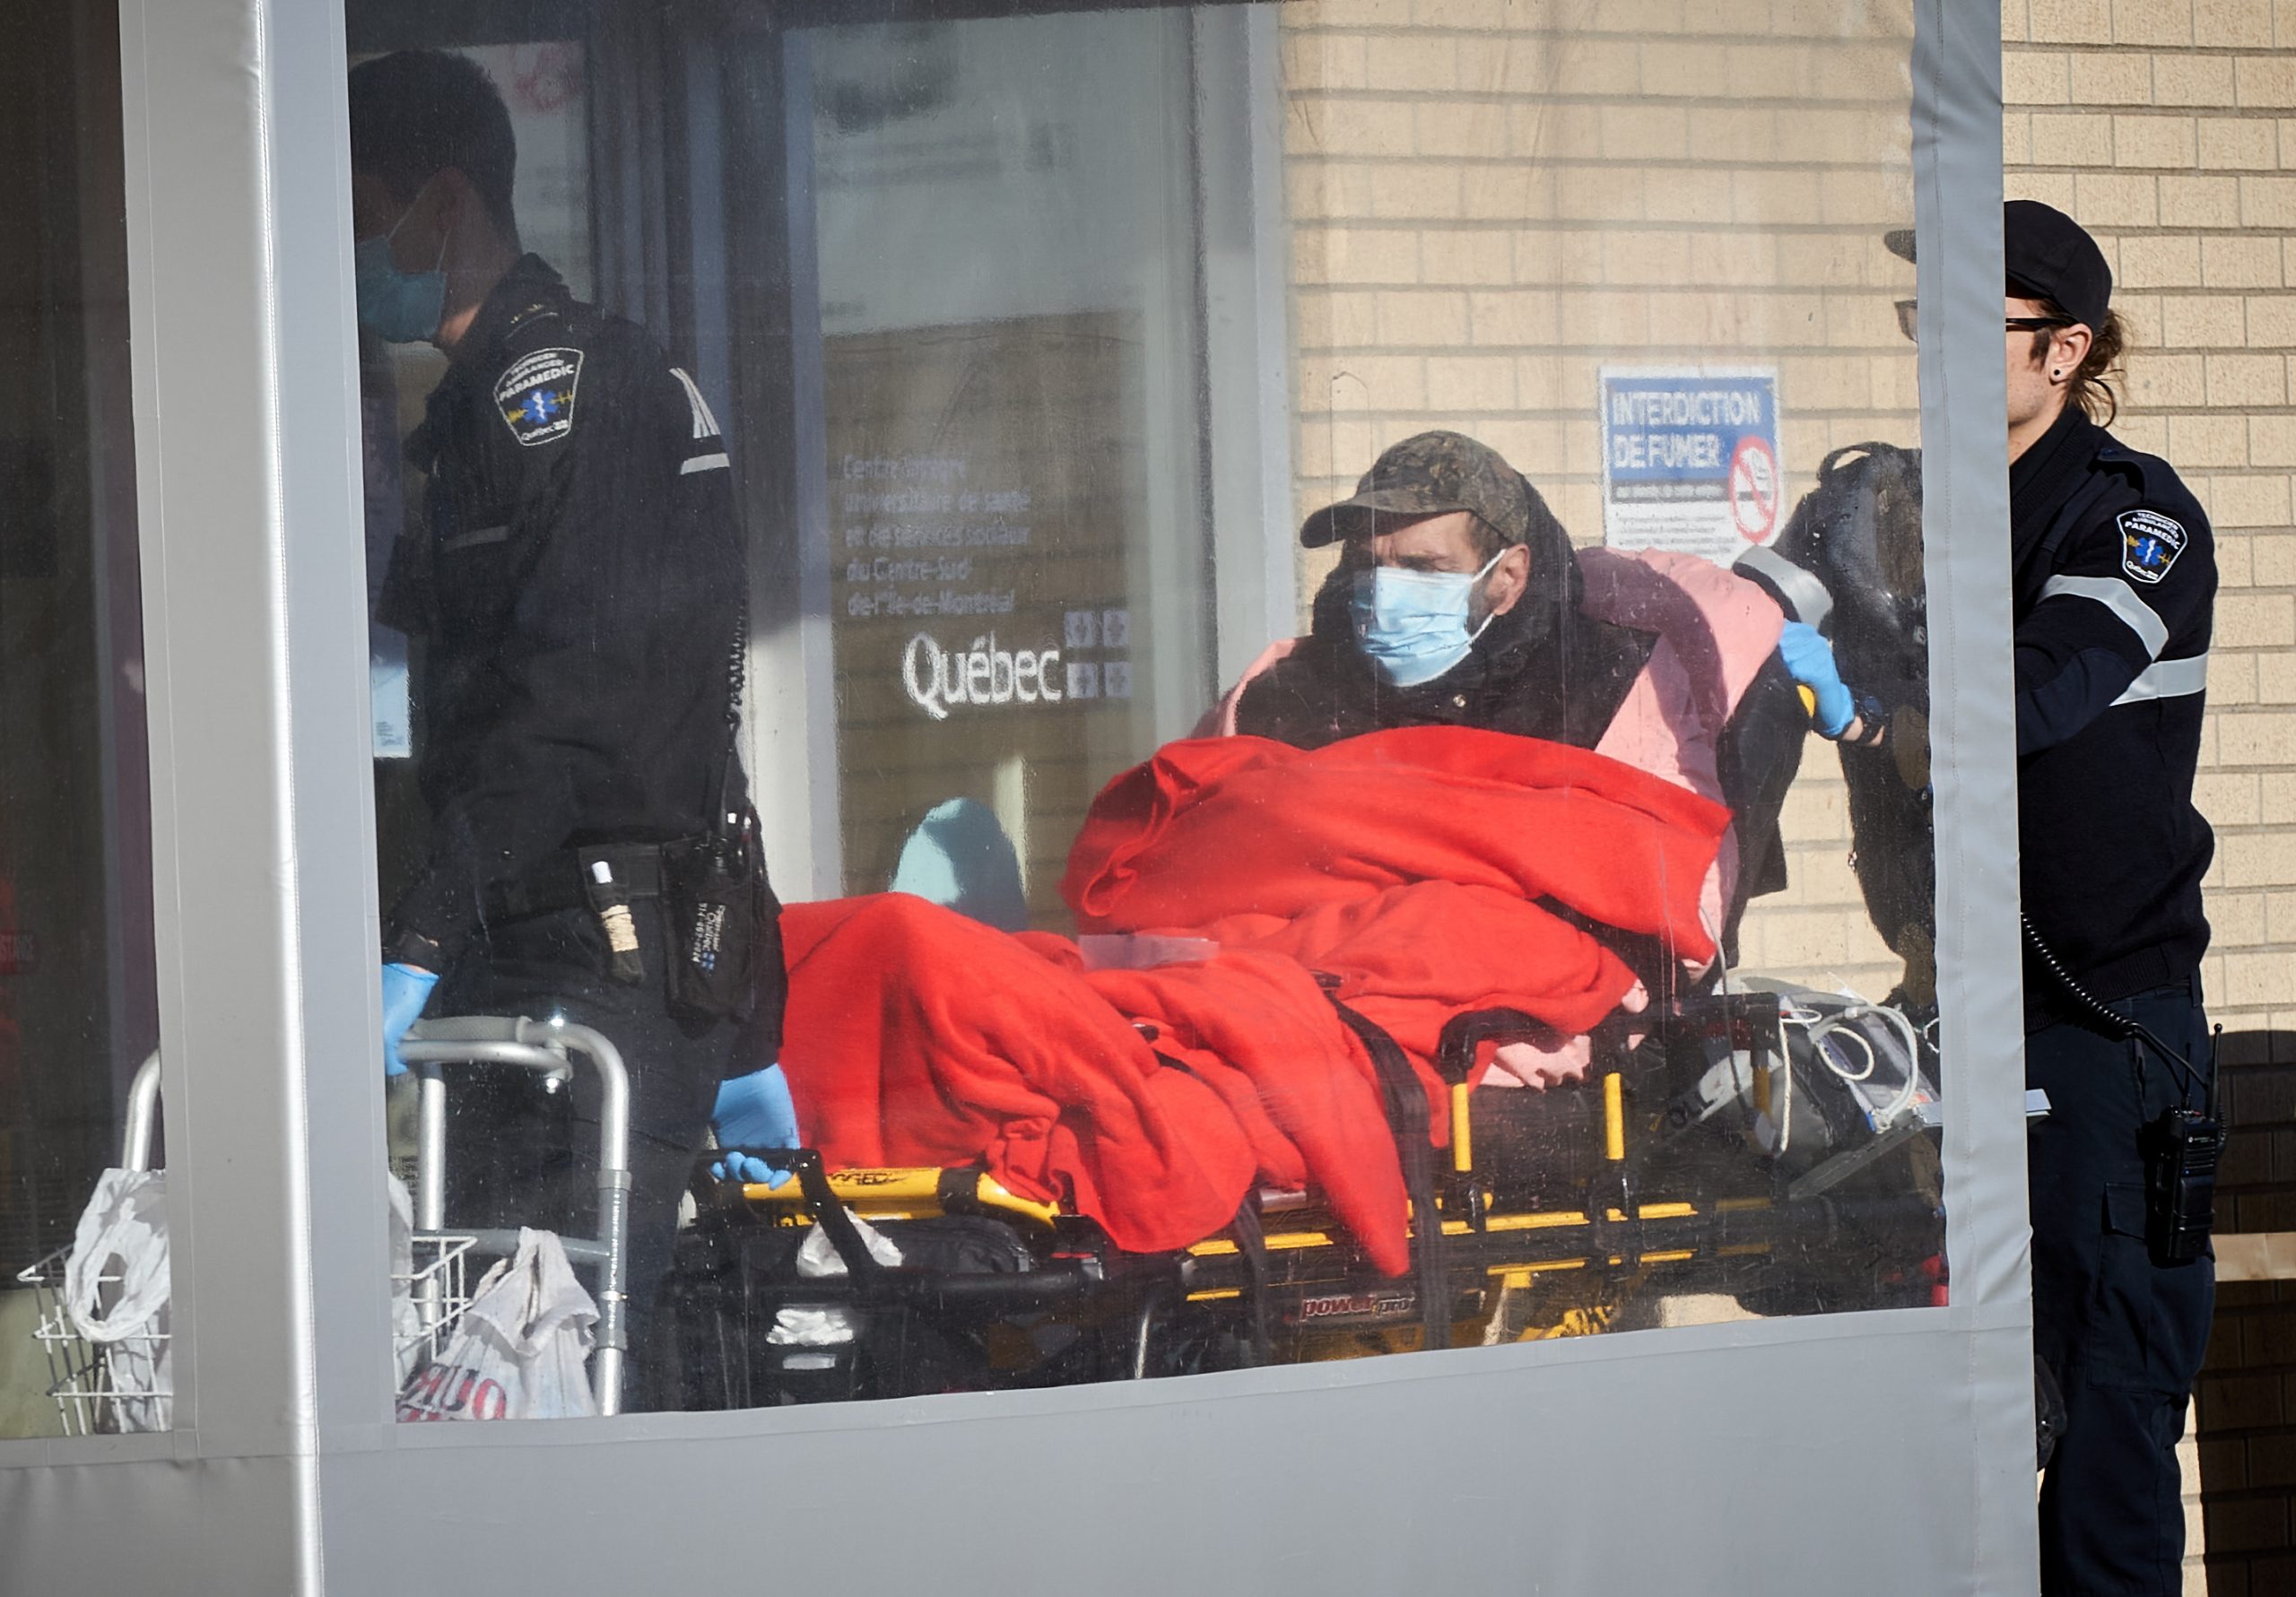 epa08296595 A paramedic brings a patient to Notre-Dame hospital in Montreal, Canada, 15 March 2020. There are more than 39 people with Coronavirus in Quebec after 18 new cases were confirmed on 15 March. The Quebec government announced today the closure of all bars, theatres, gyms, ski hills, sugar shacks, arcades and pools to slow the spread of the pandemic of coronavirus.  EPA/Andre Pichette